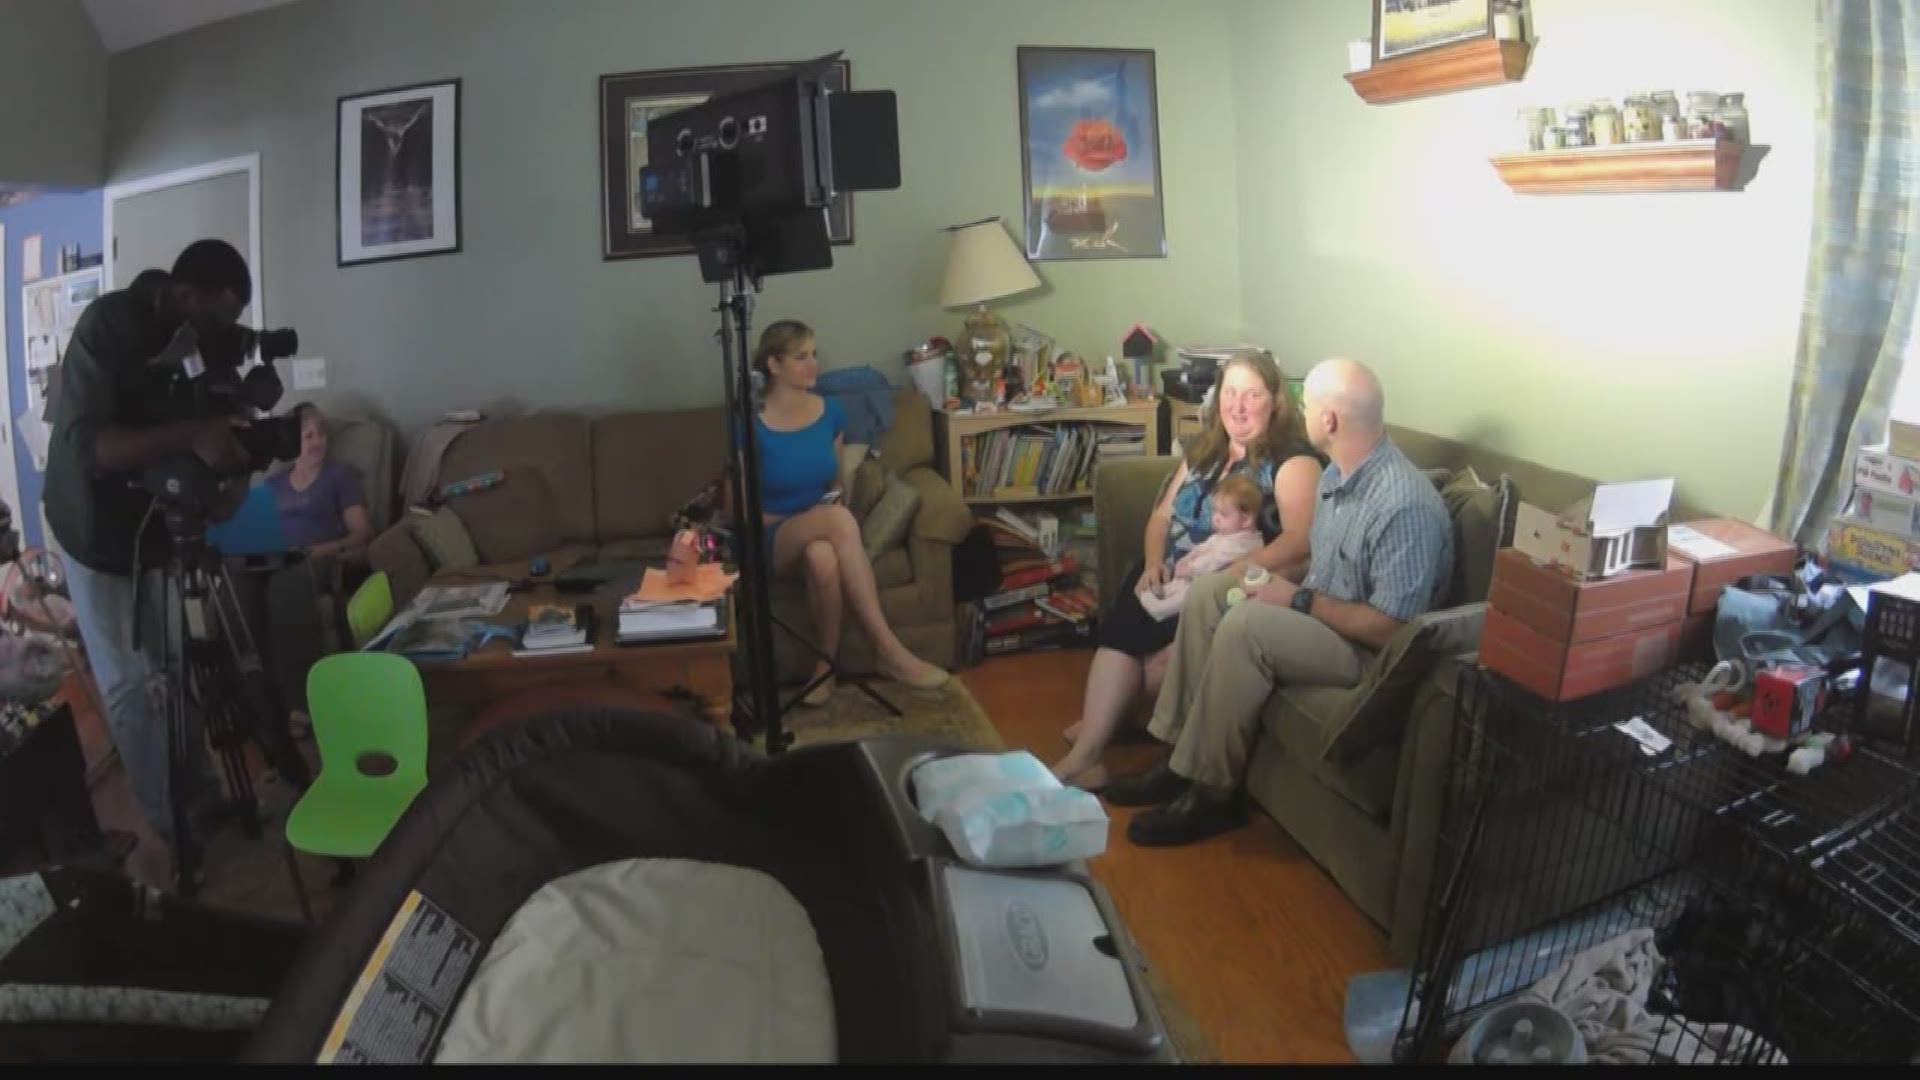 Parents talk about time away from work when a baby arrives.